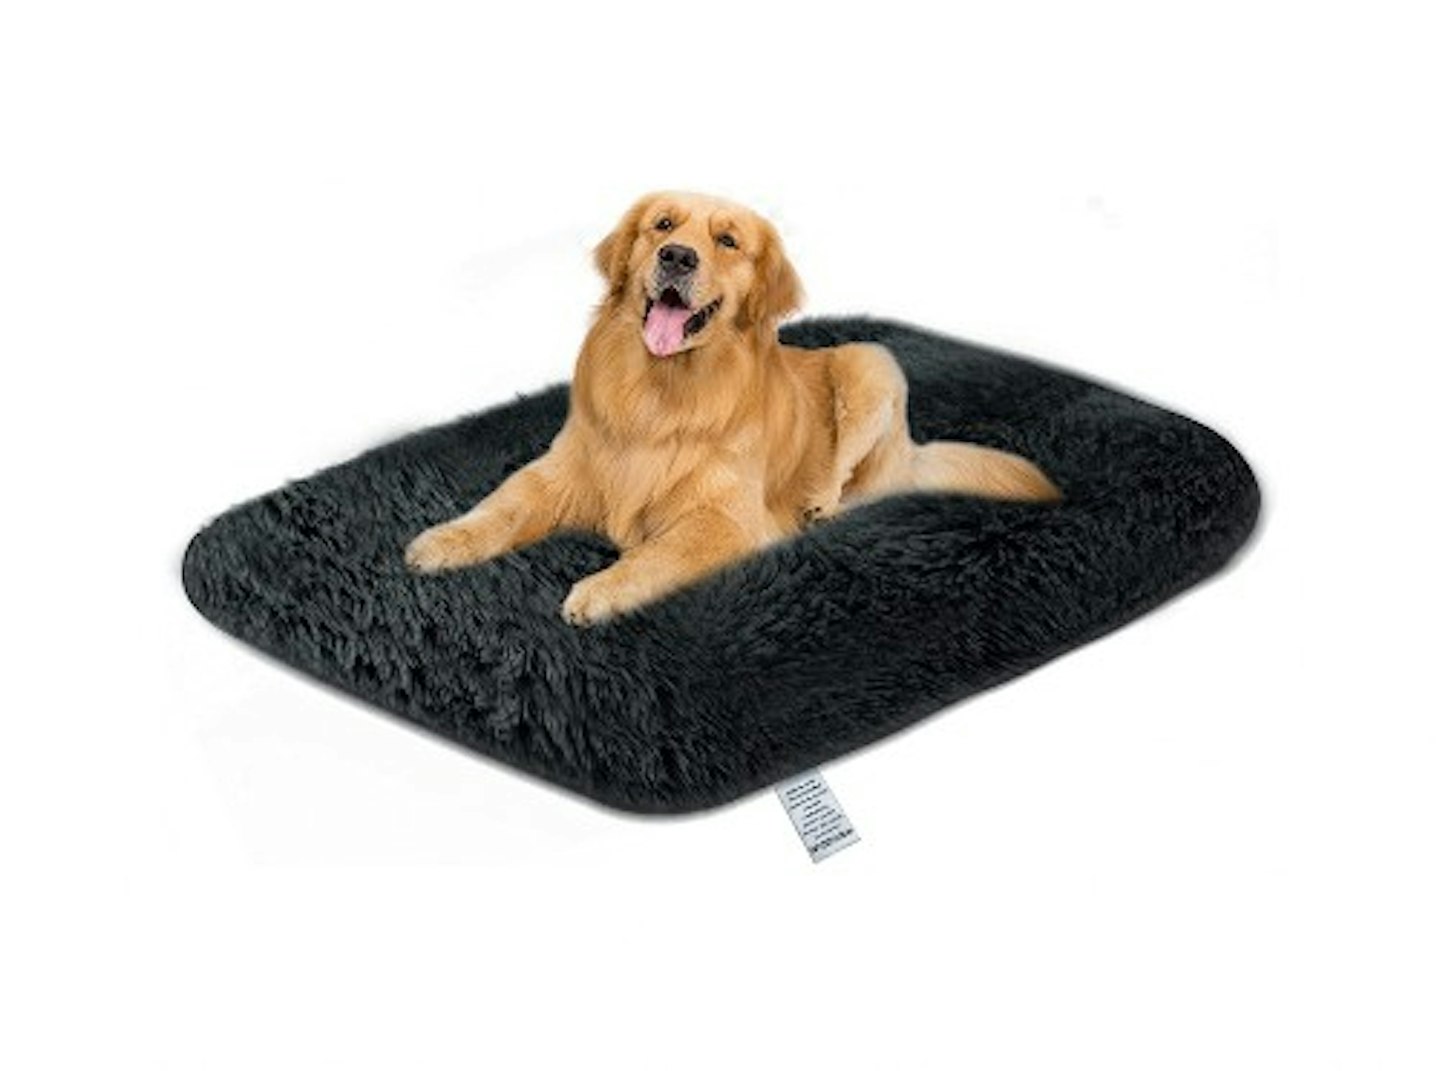 Dog Bed Crate Mattress Fluffy Anti Anxiety Calming Pet Bed Cushion